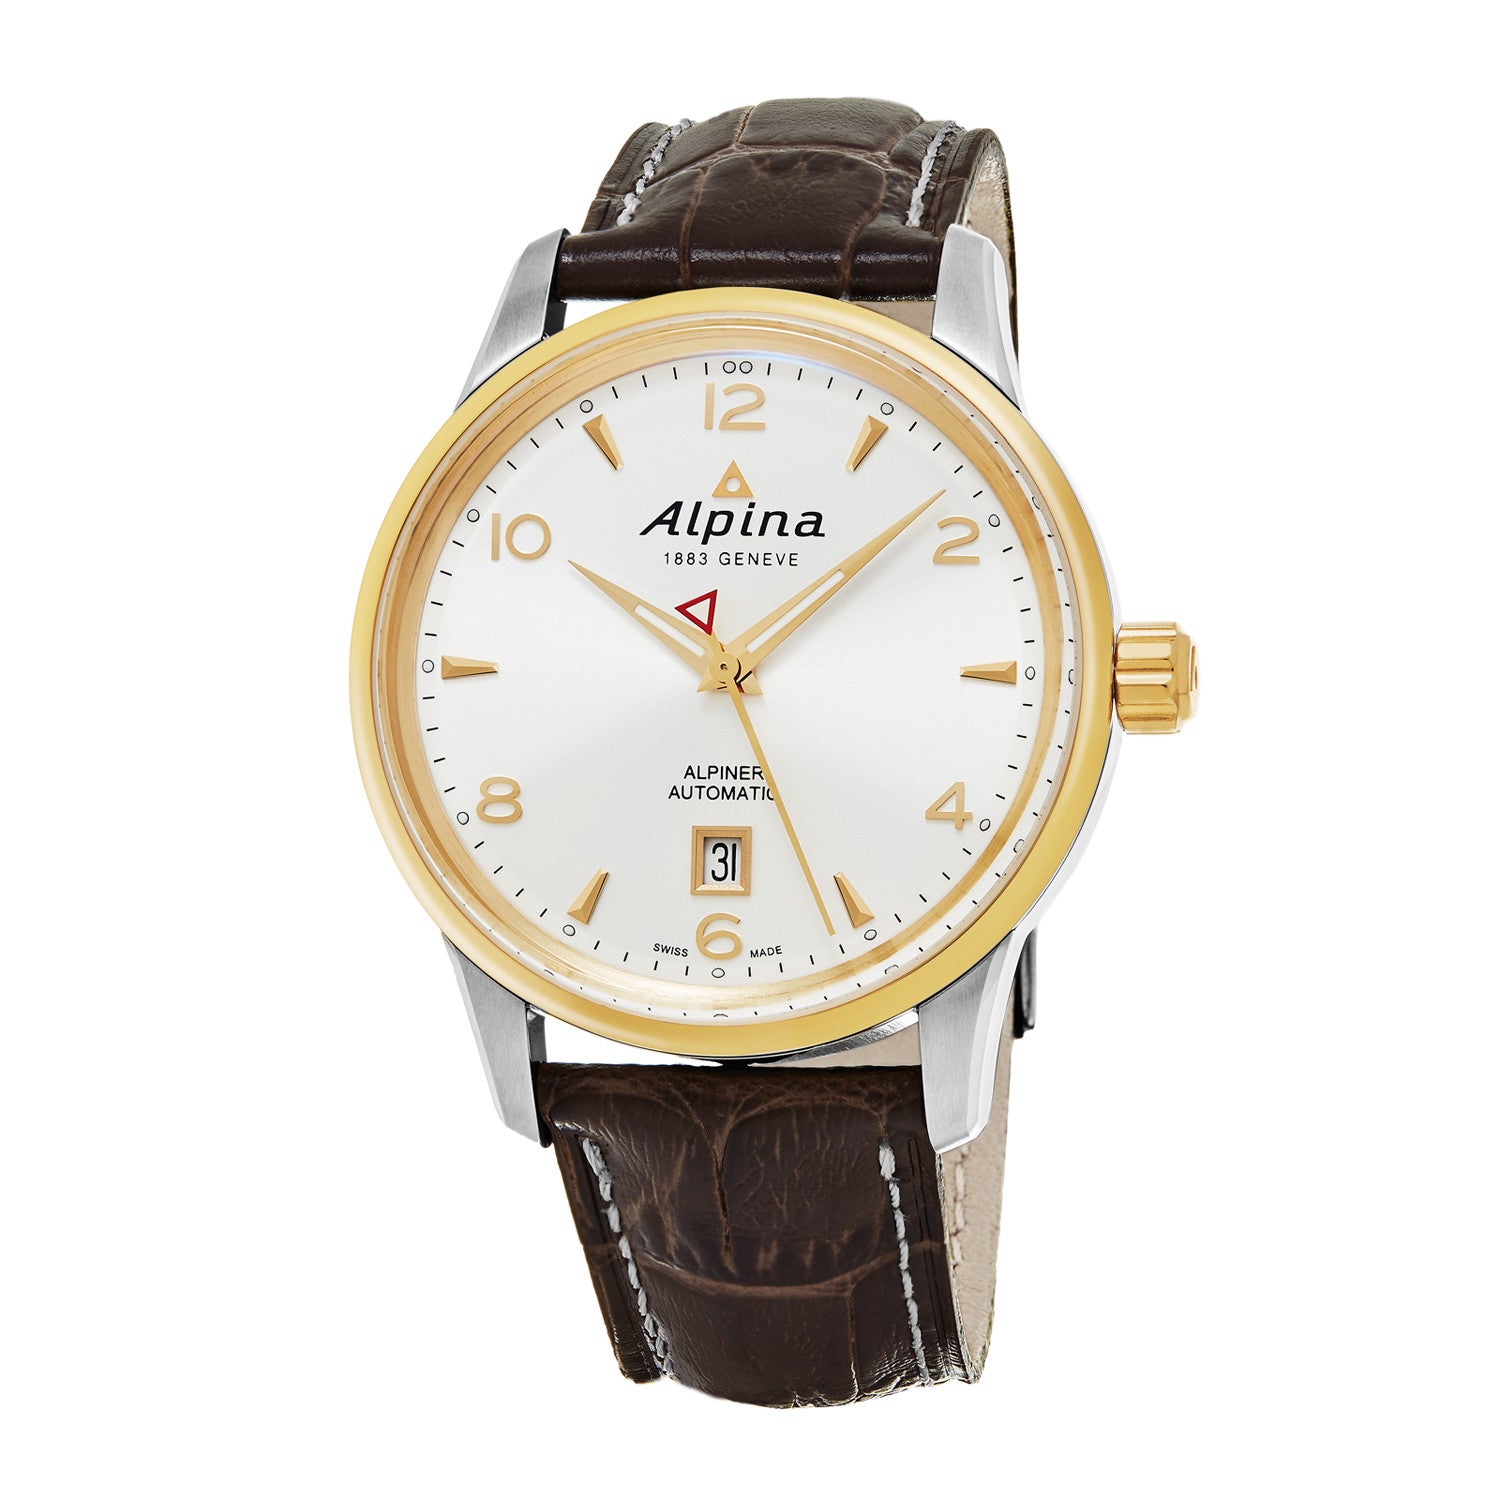 Alpiner Automatic (White-Gold) | Alpina | Luby 